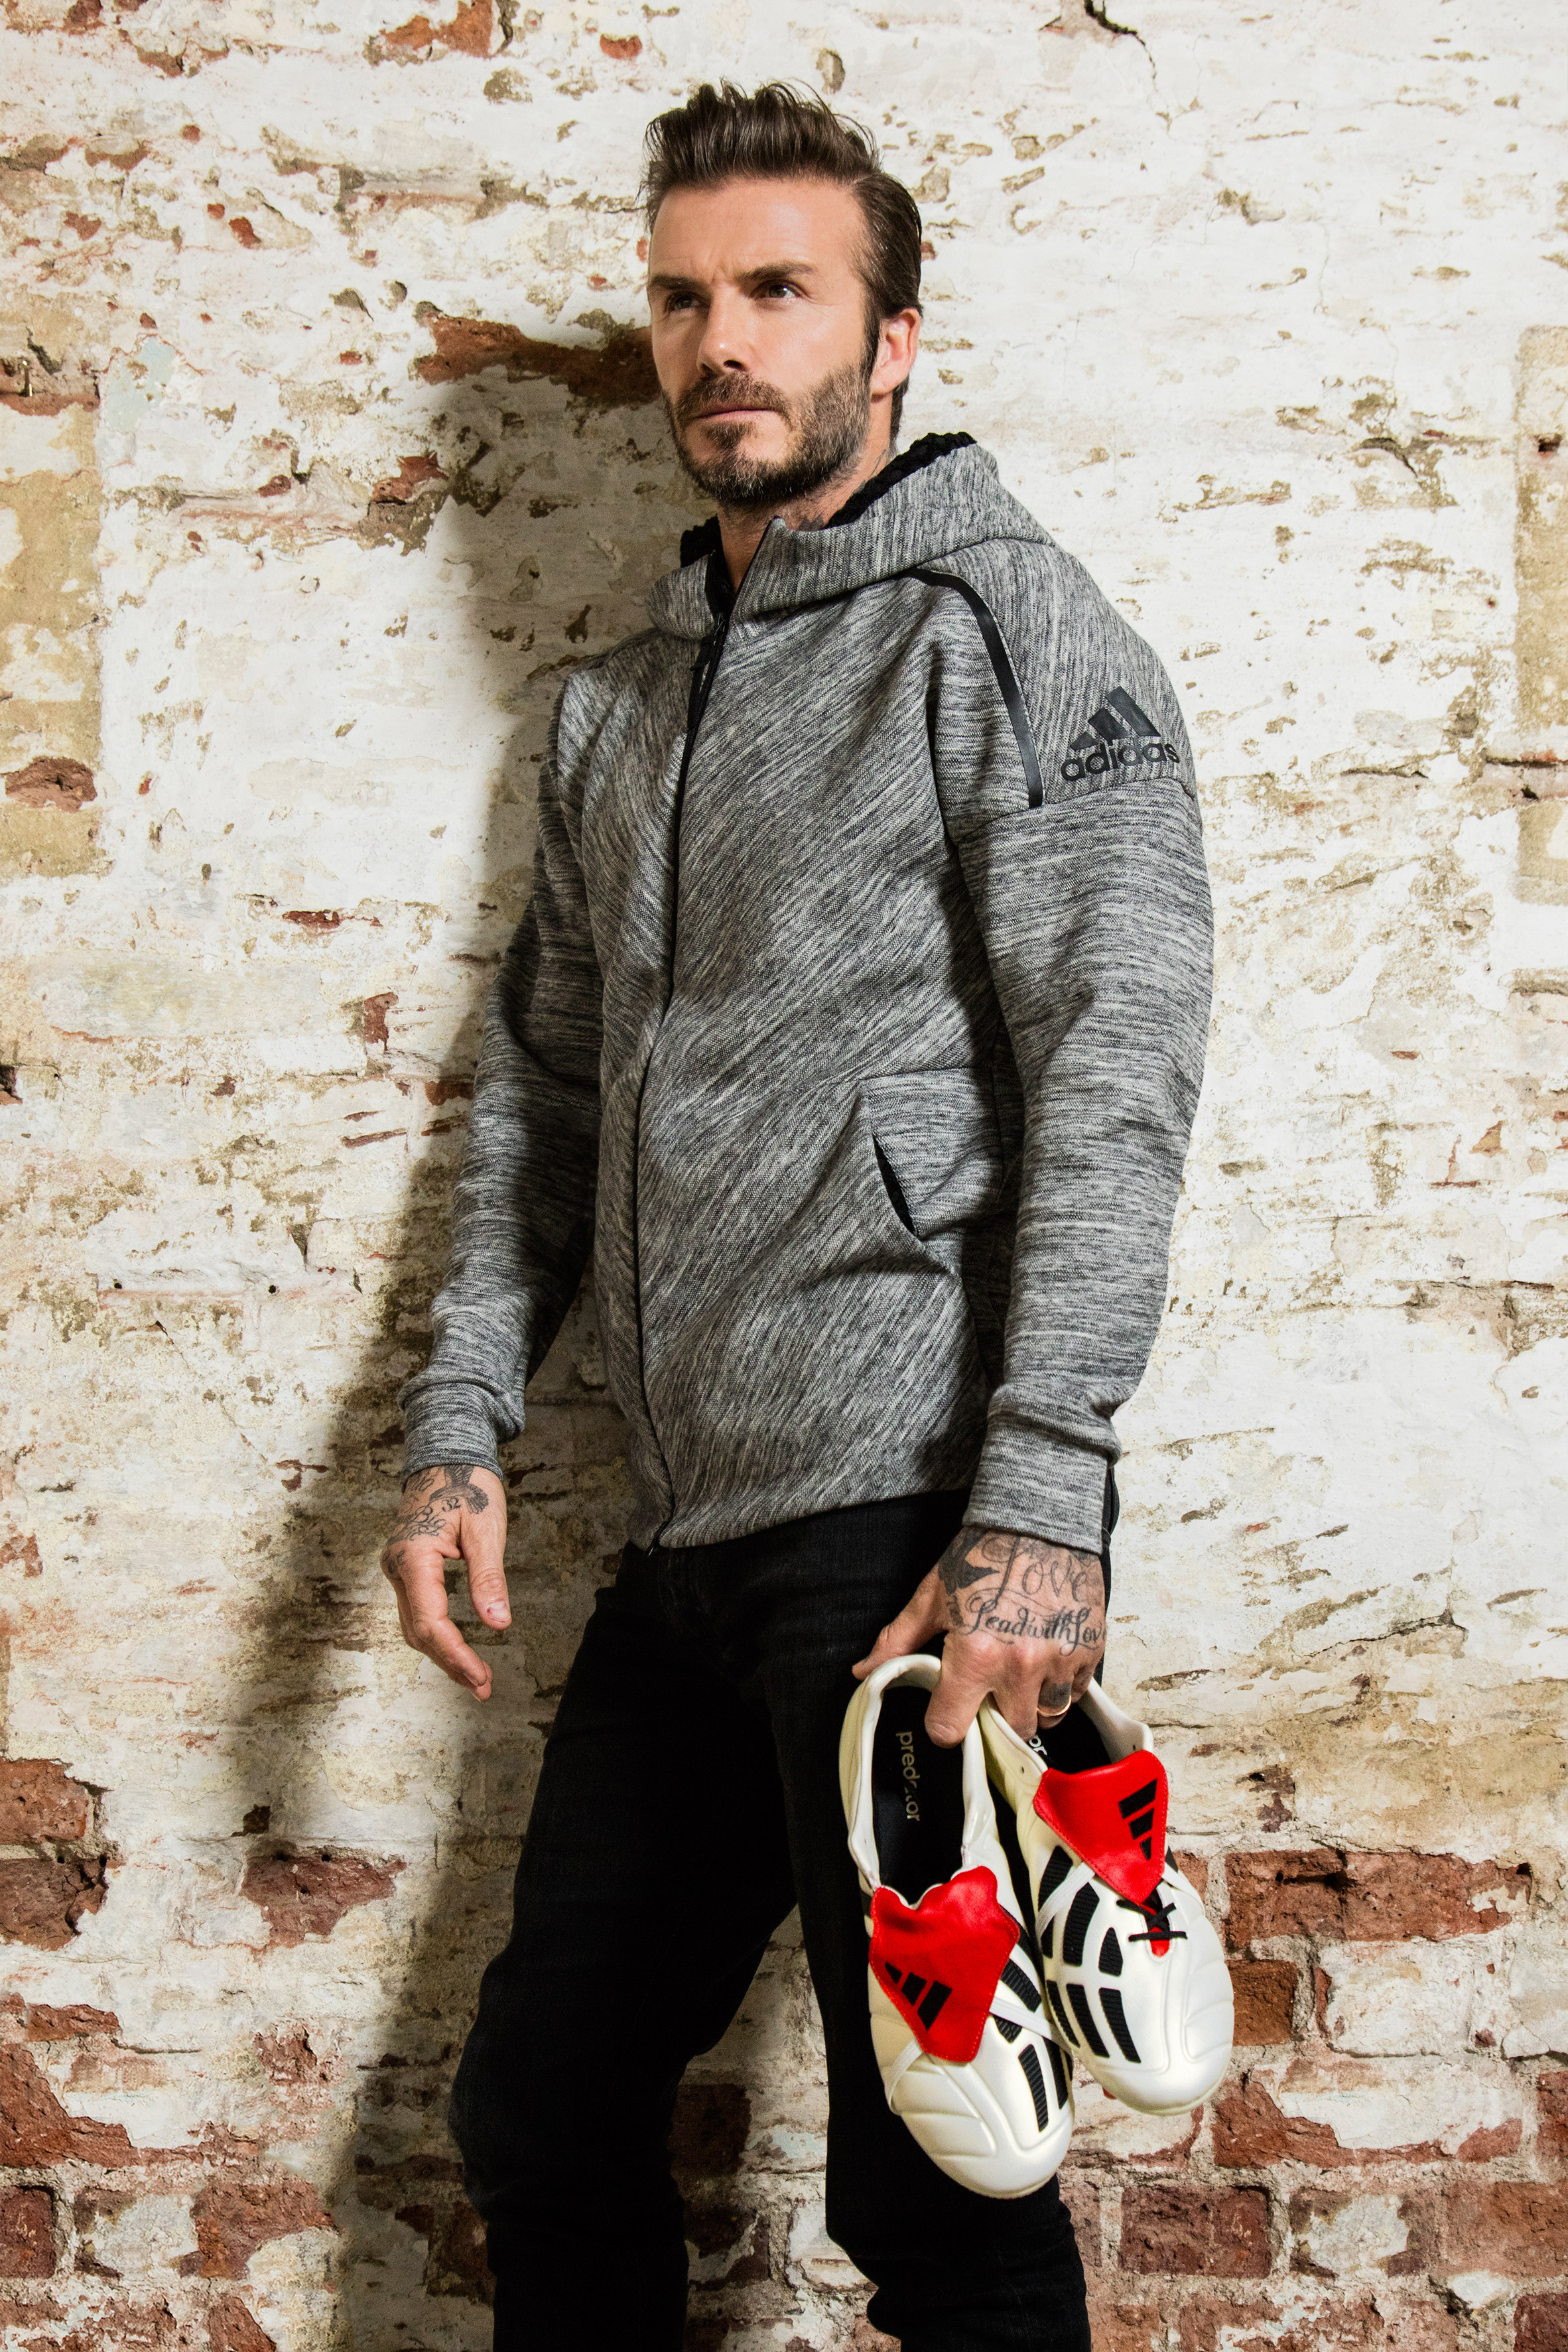 Adidas relaunches iconic football boots made famous by David Beckham